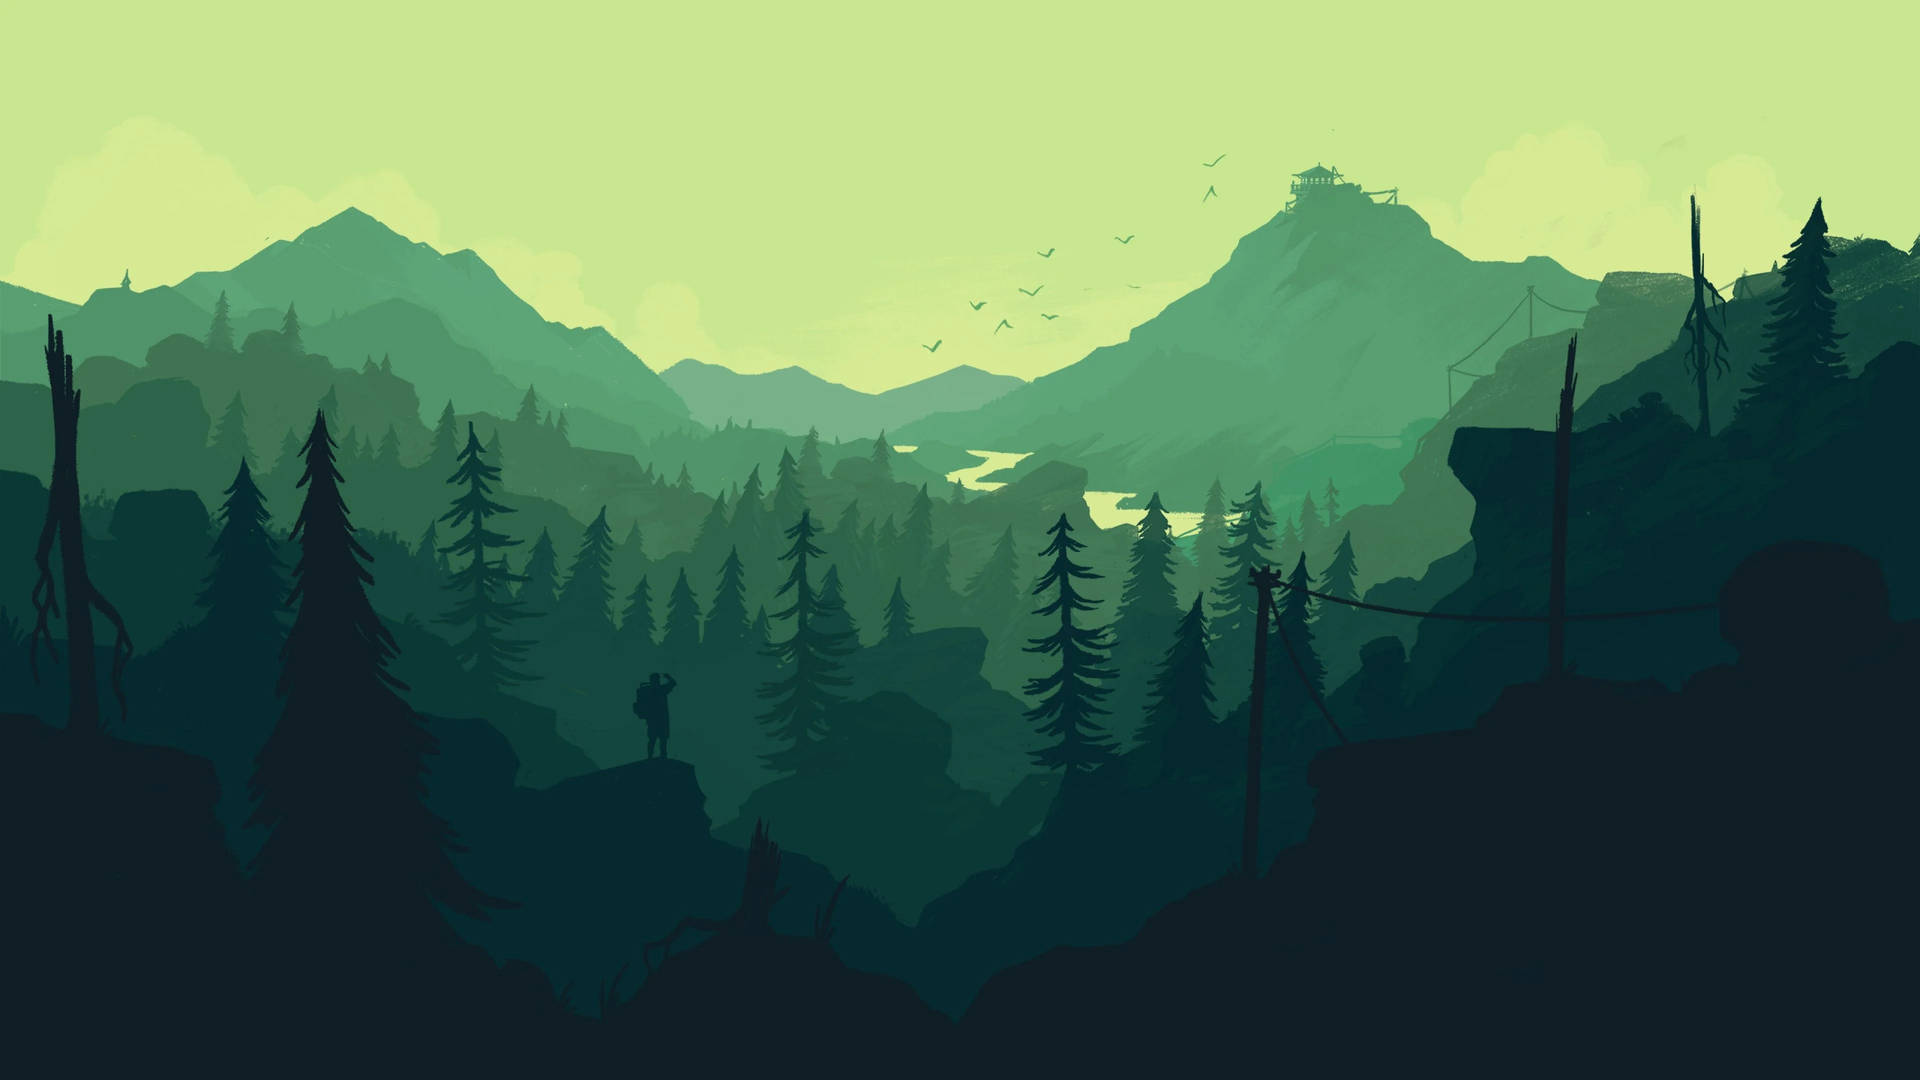 Green Sky, Mountains And Trees 4k Flat Wallpaper